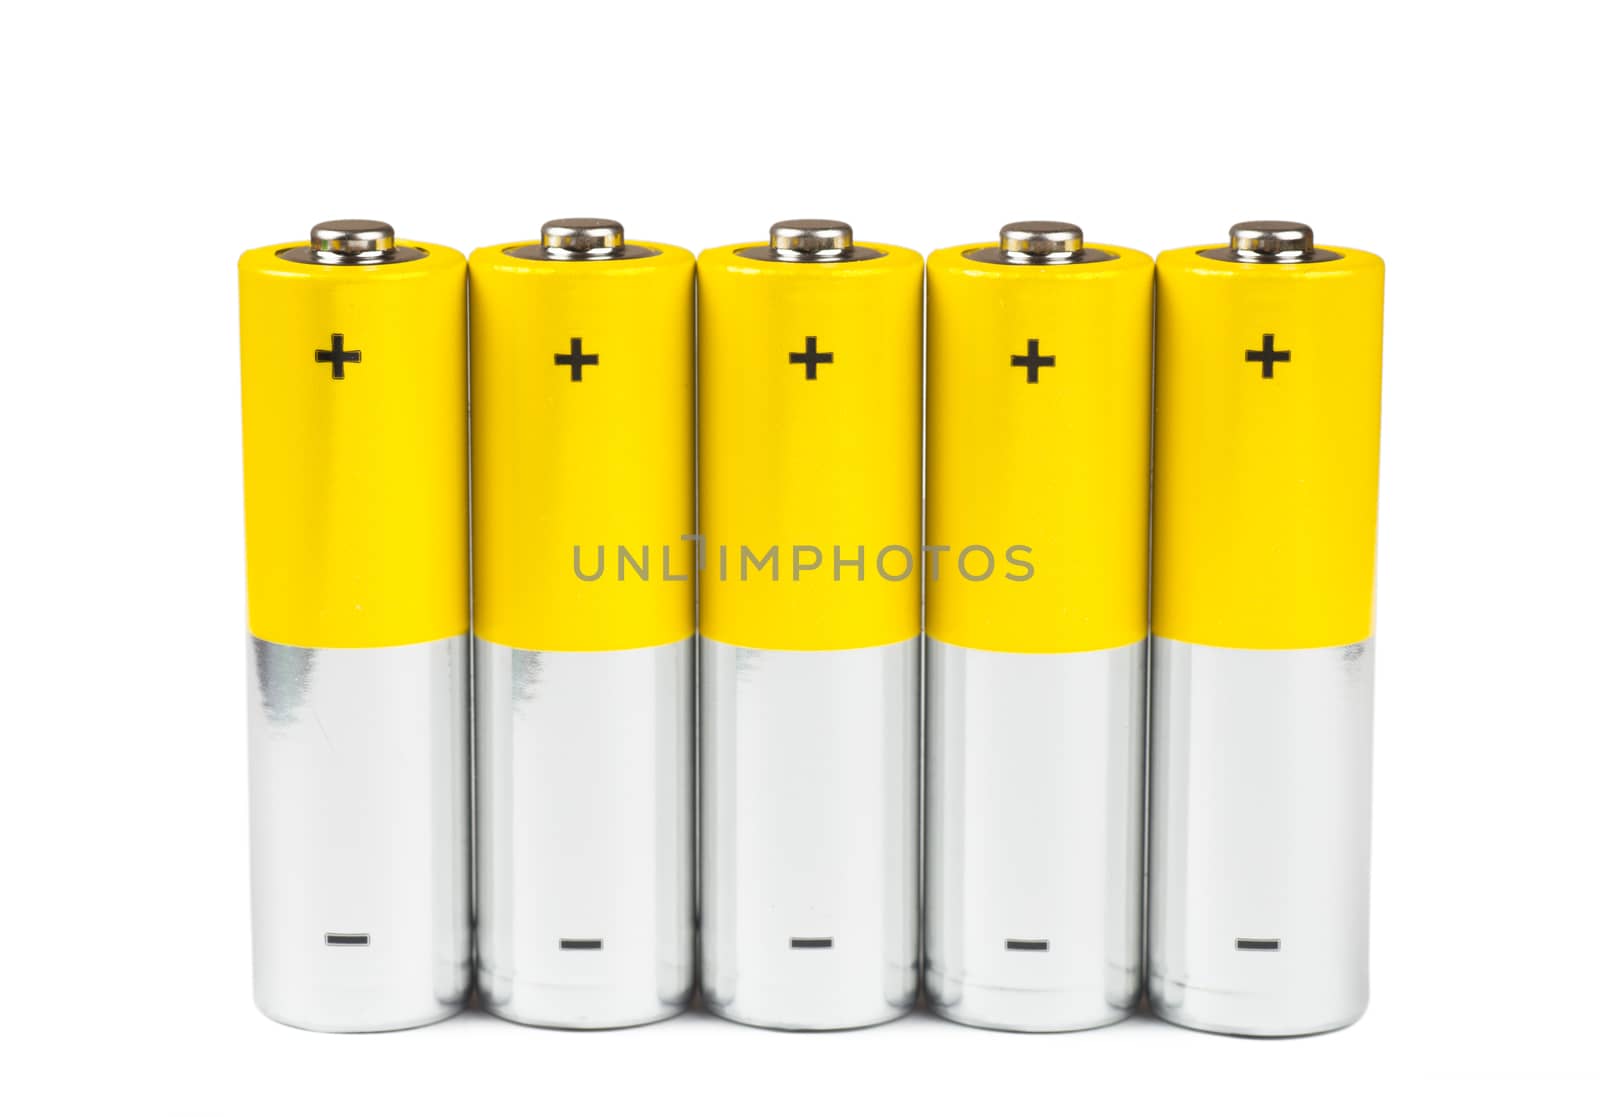 Batteries by AGorohov